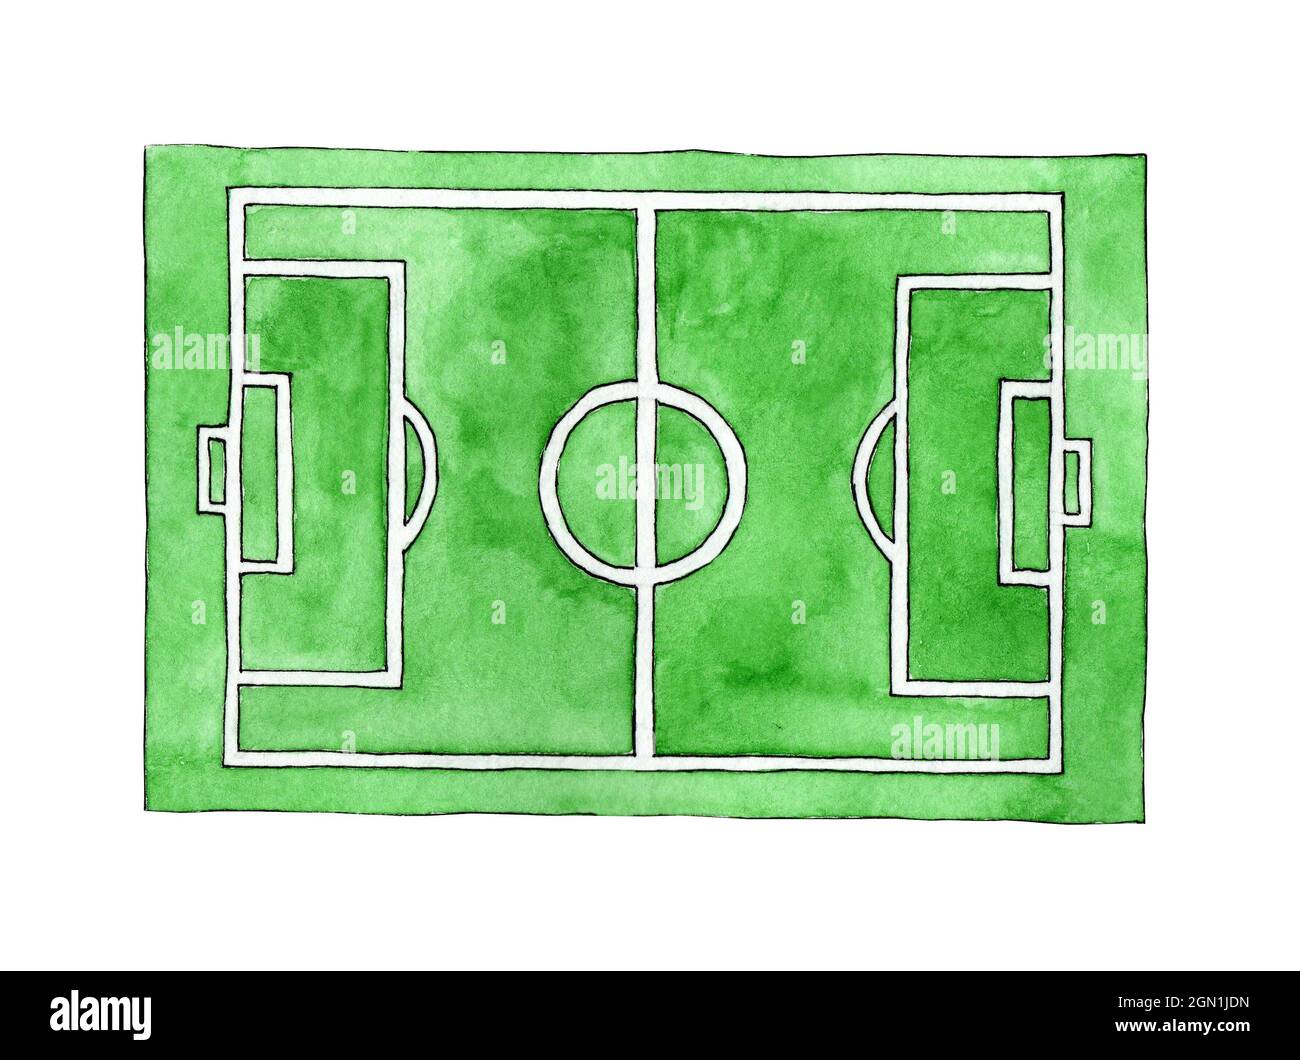 Football Ground Drawing Stock Photos - 2,321 Images | Shutterstock